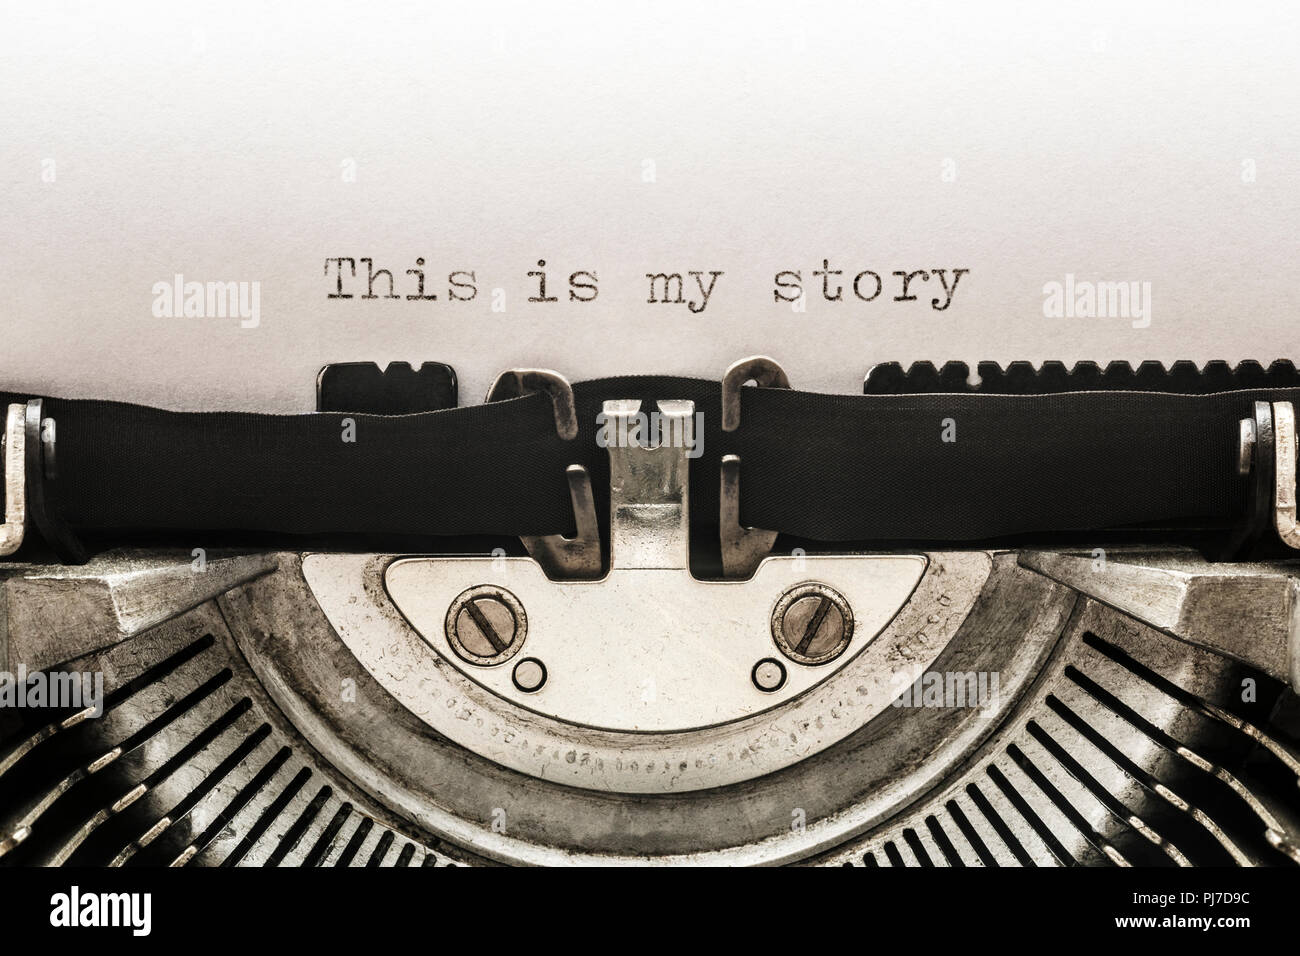 This is my story typed on a vintage typewriter Stock Photo